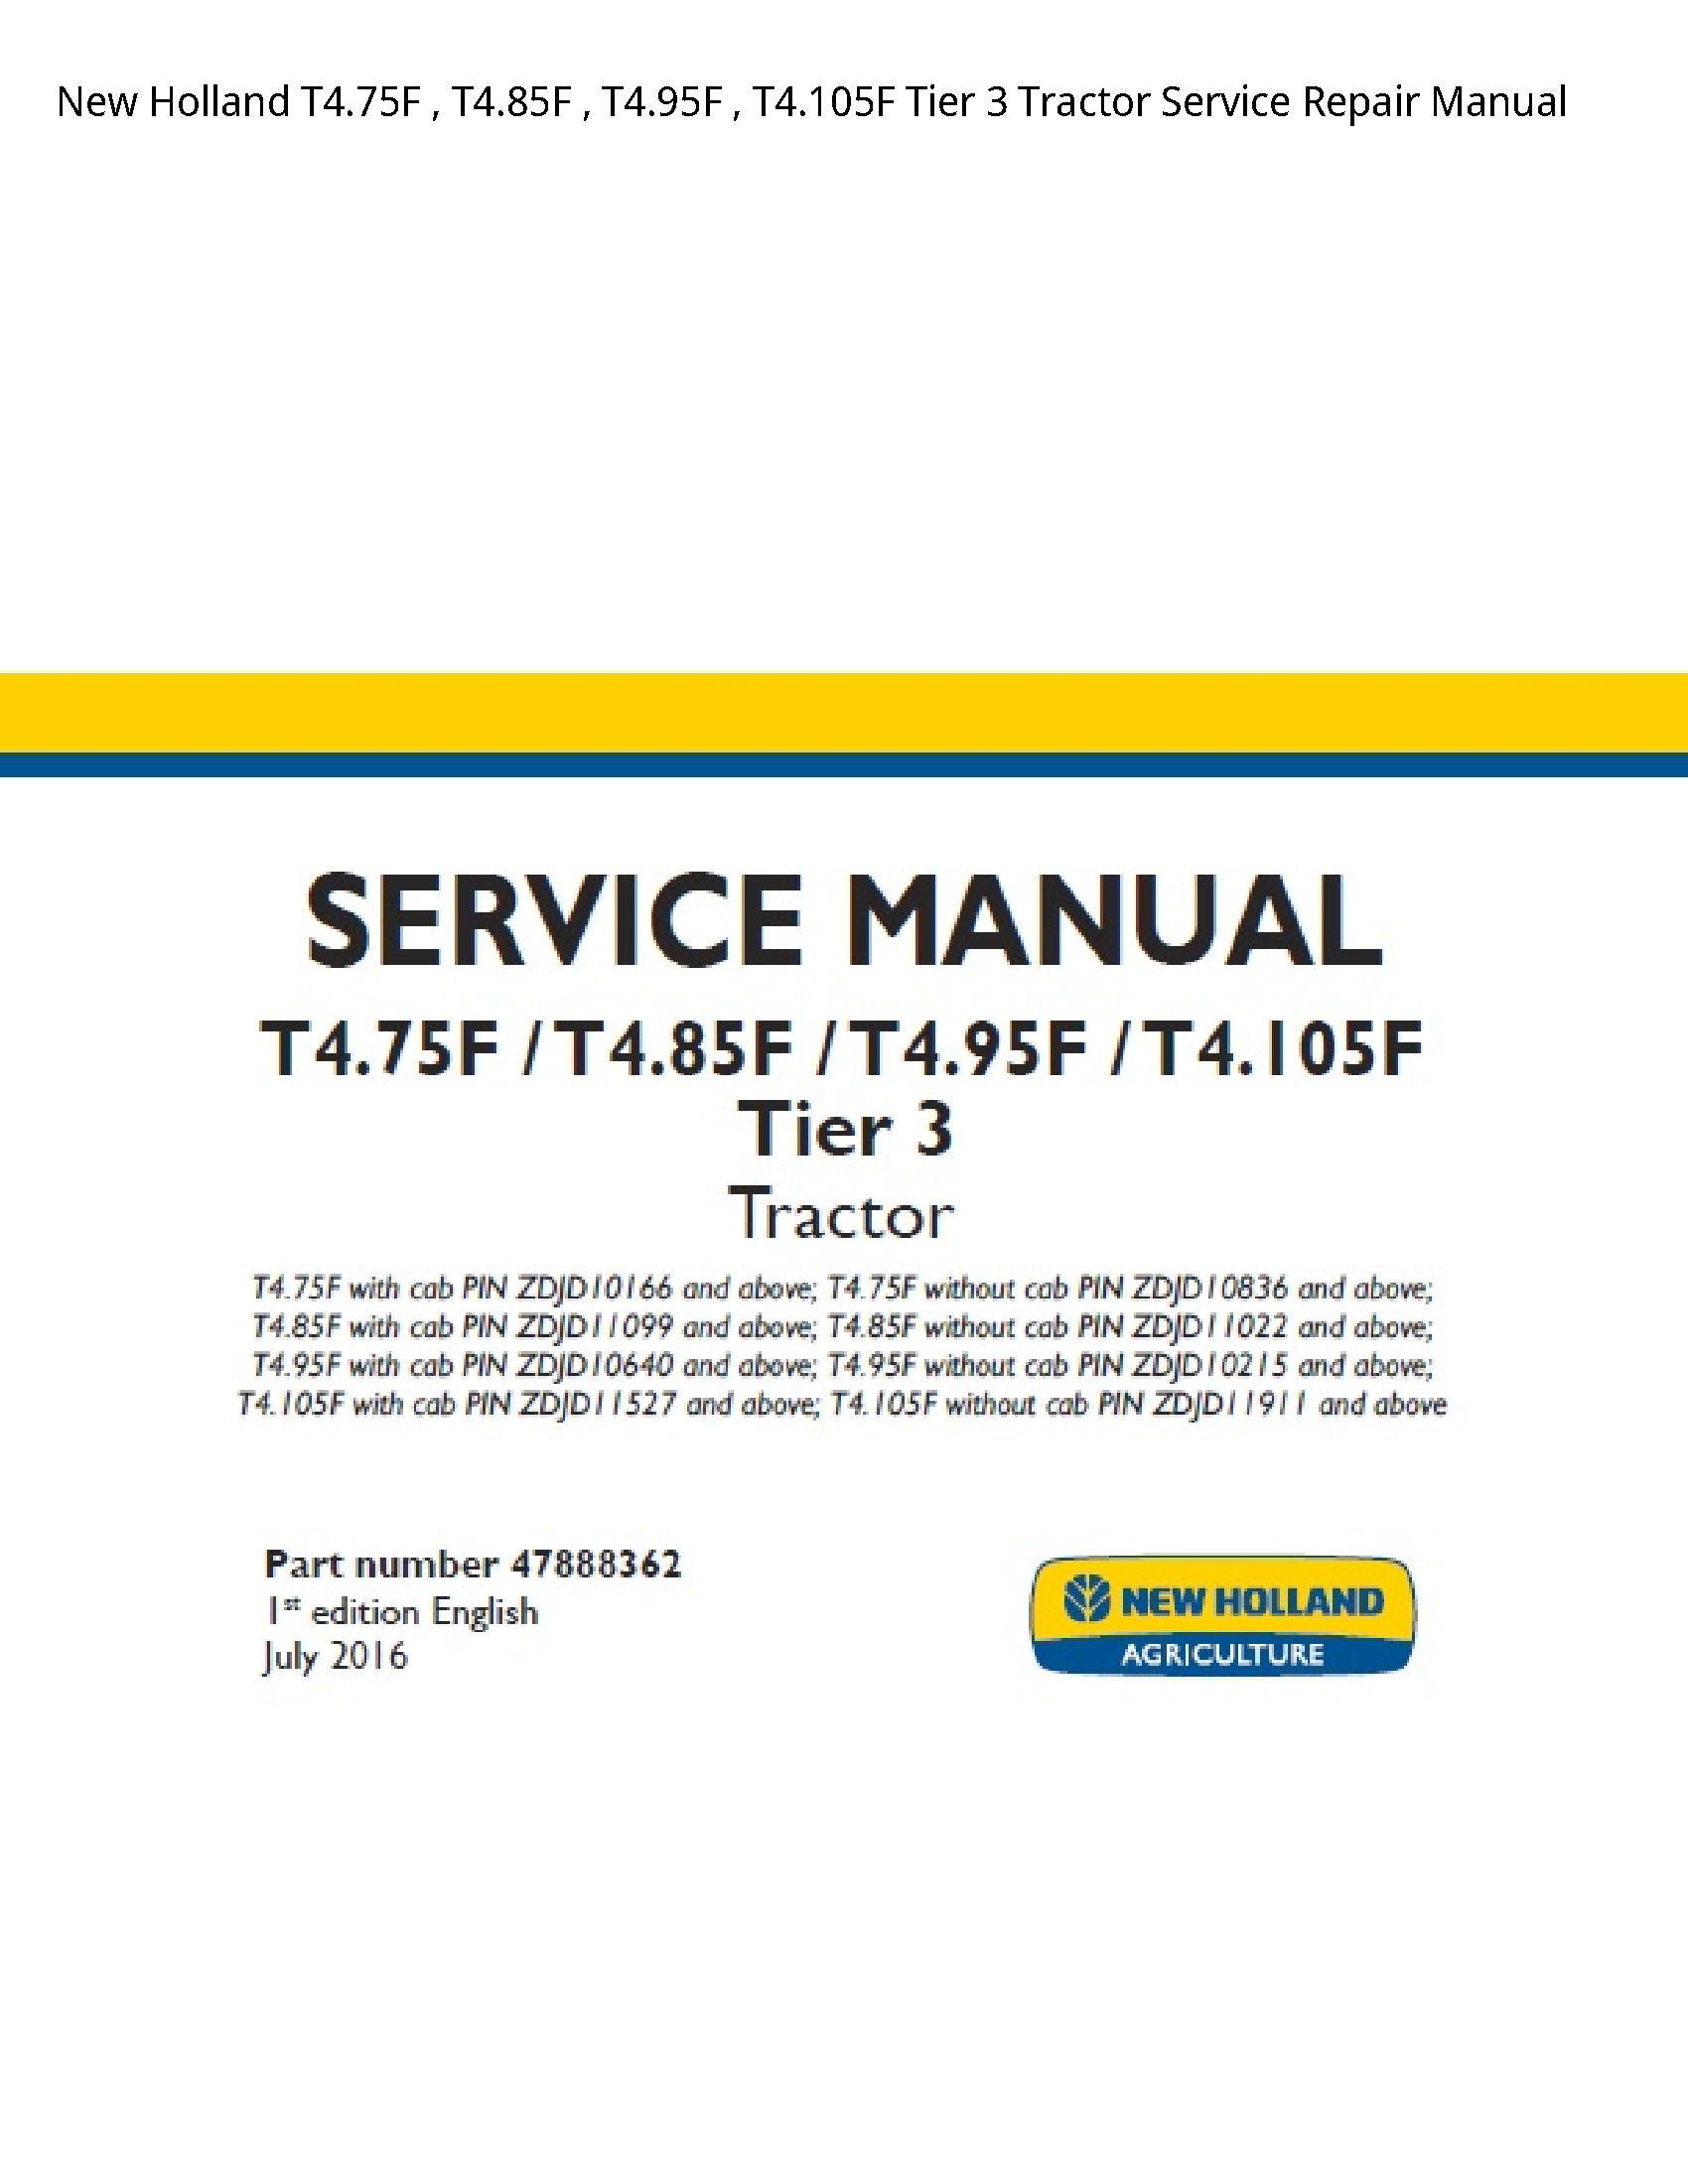 New Holland T4.75F Tier Tractor manual